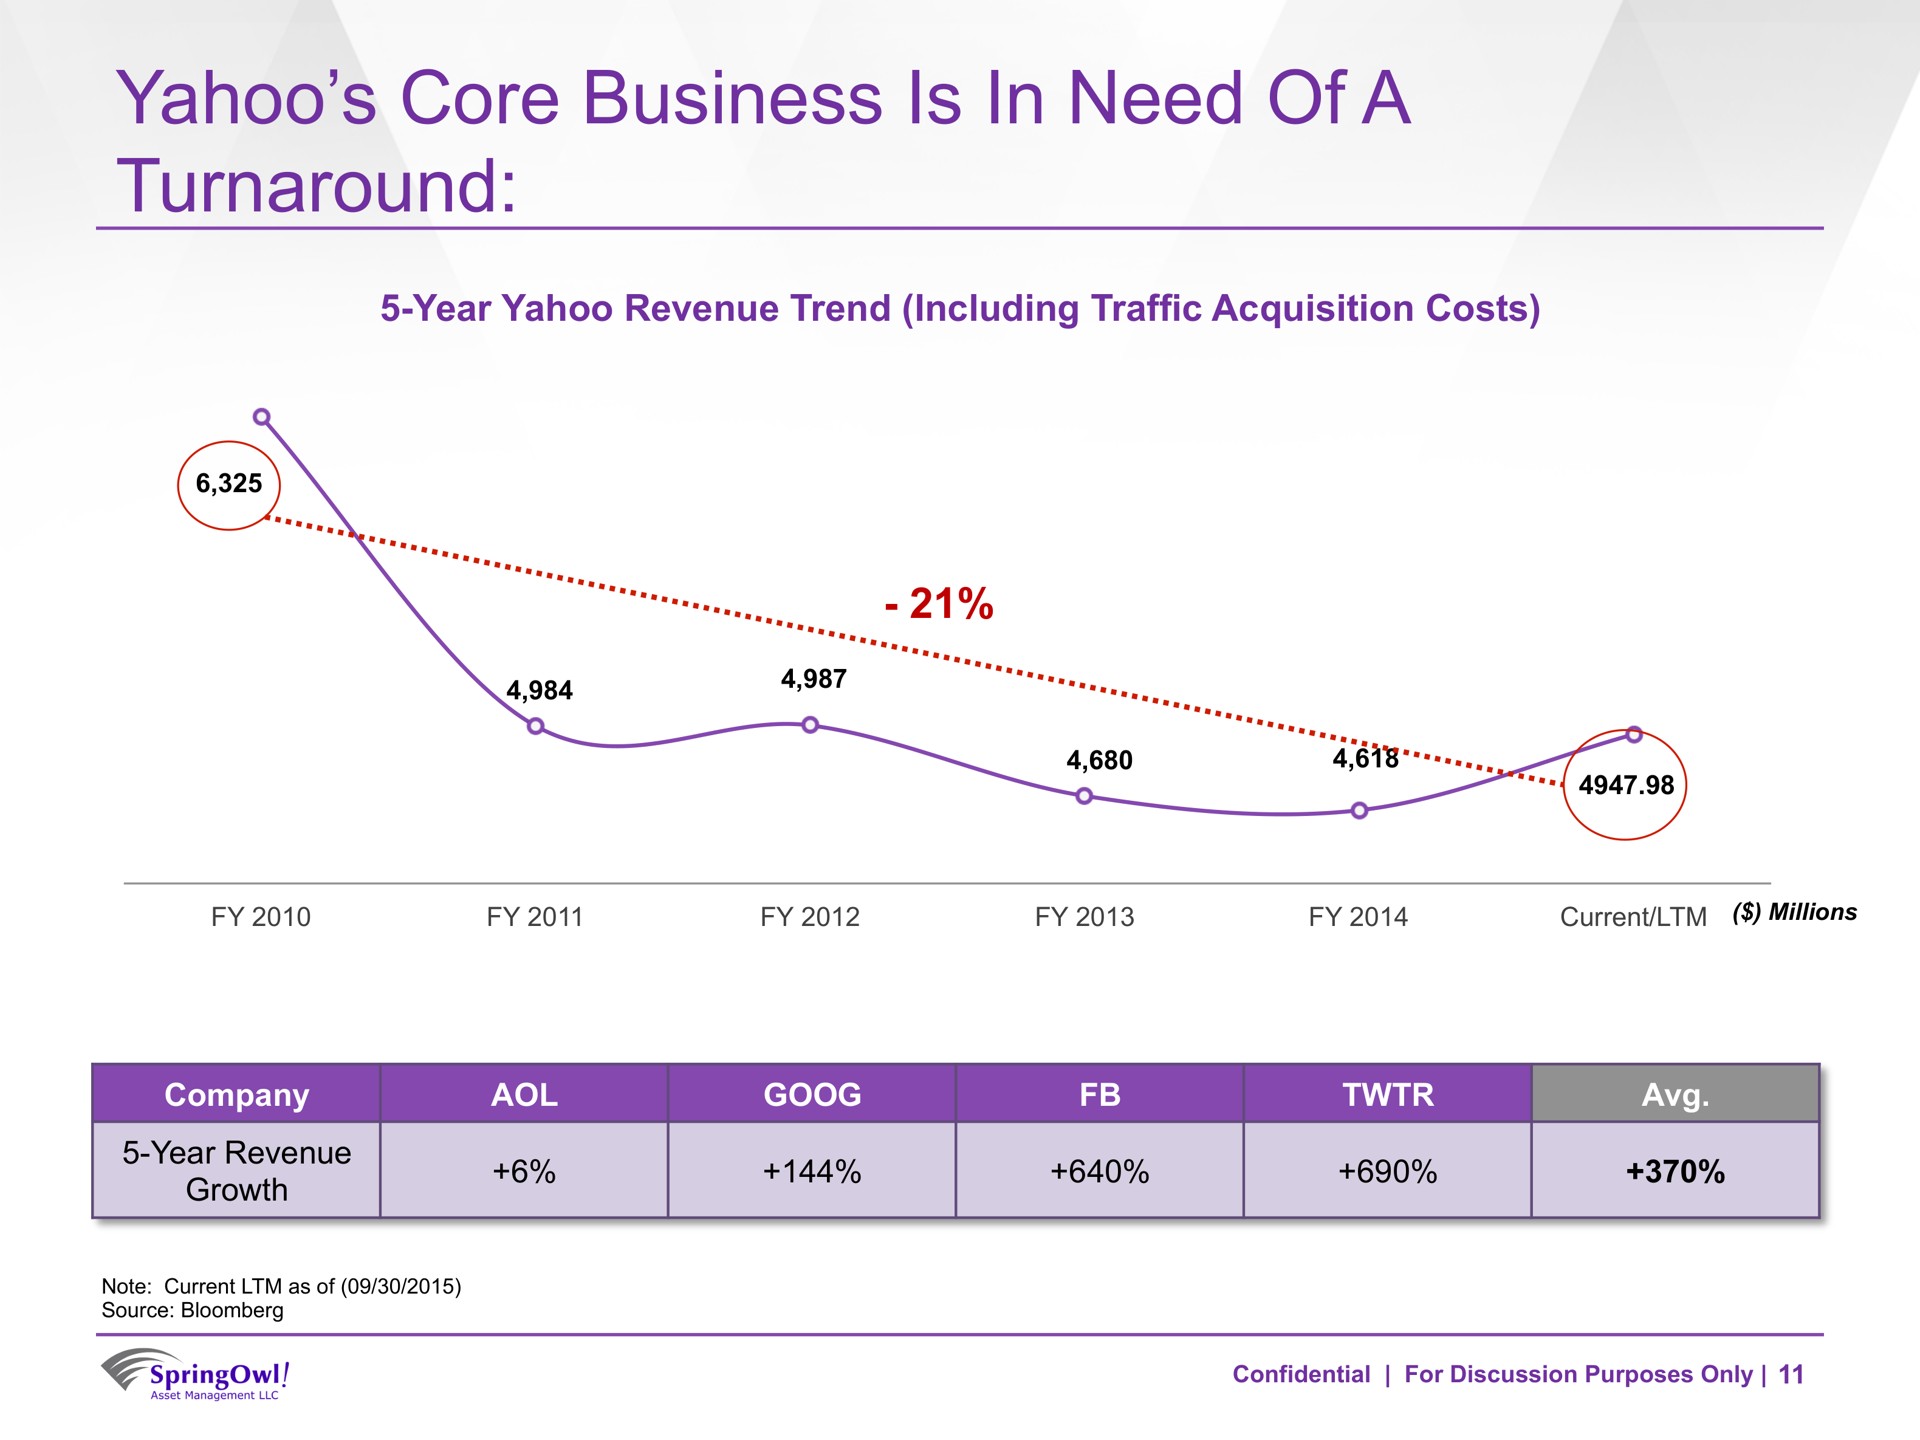 yahoo core business is in need of a turnaround | SpringOwl